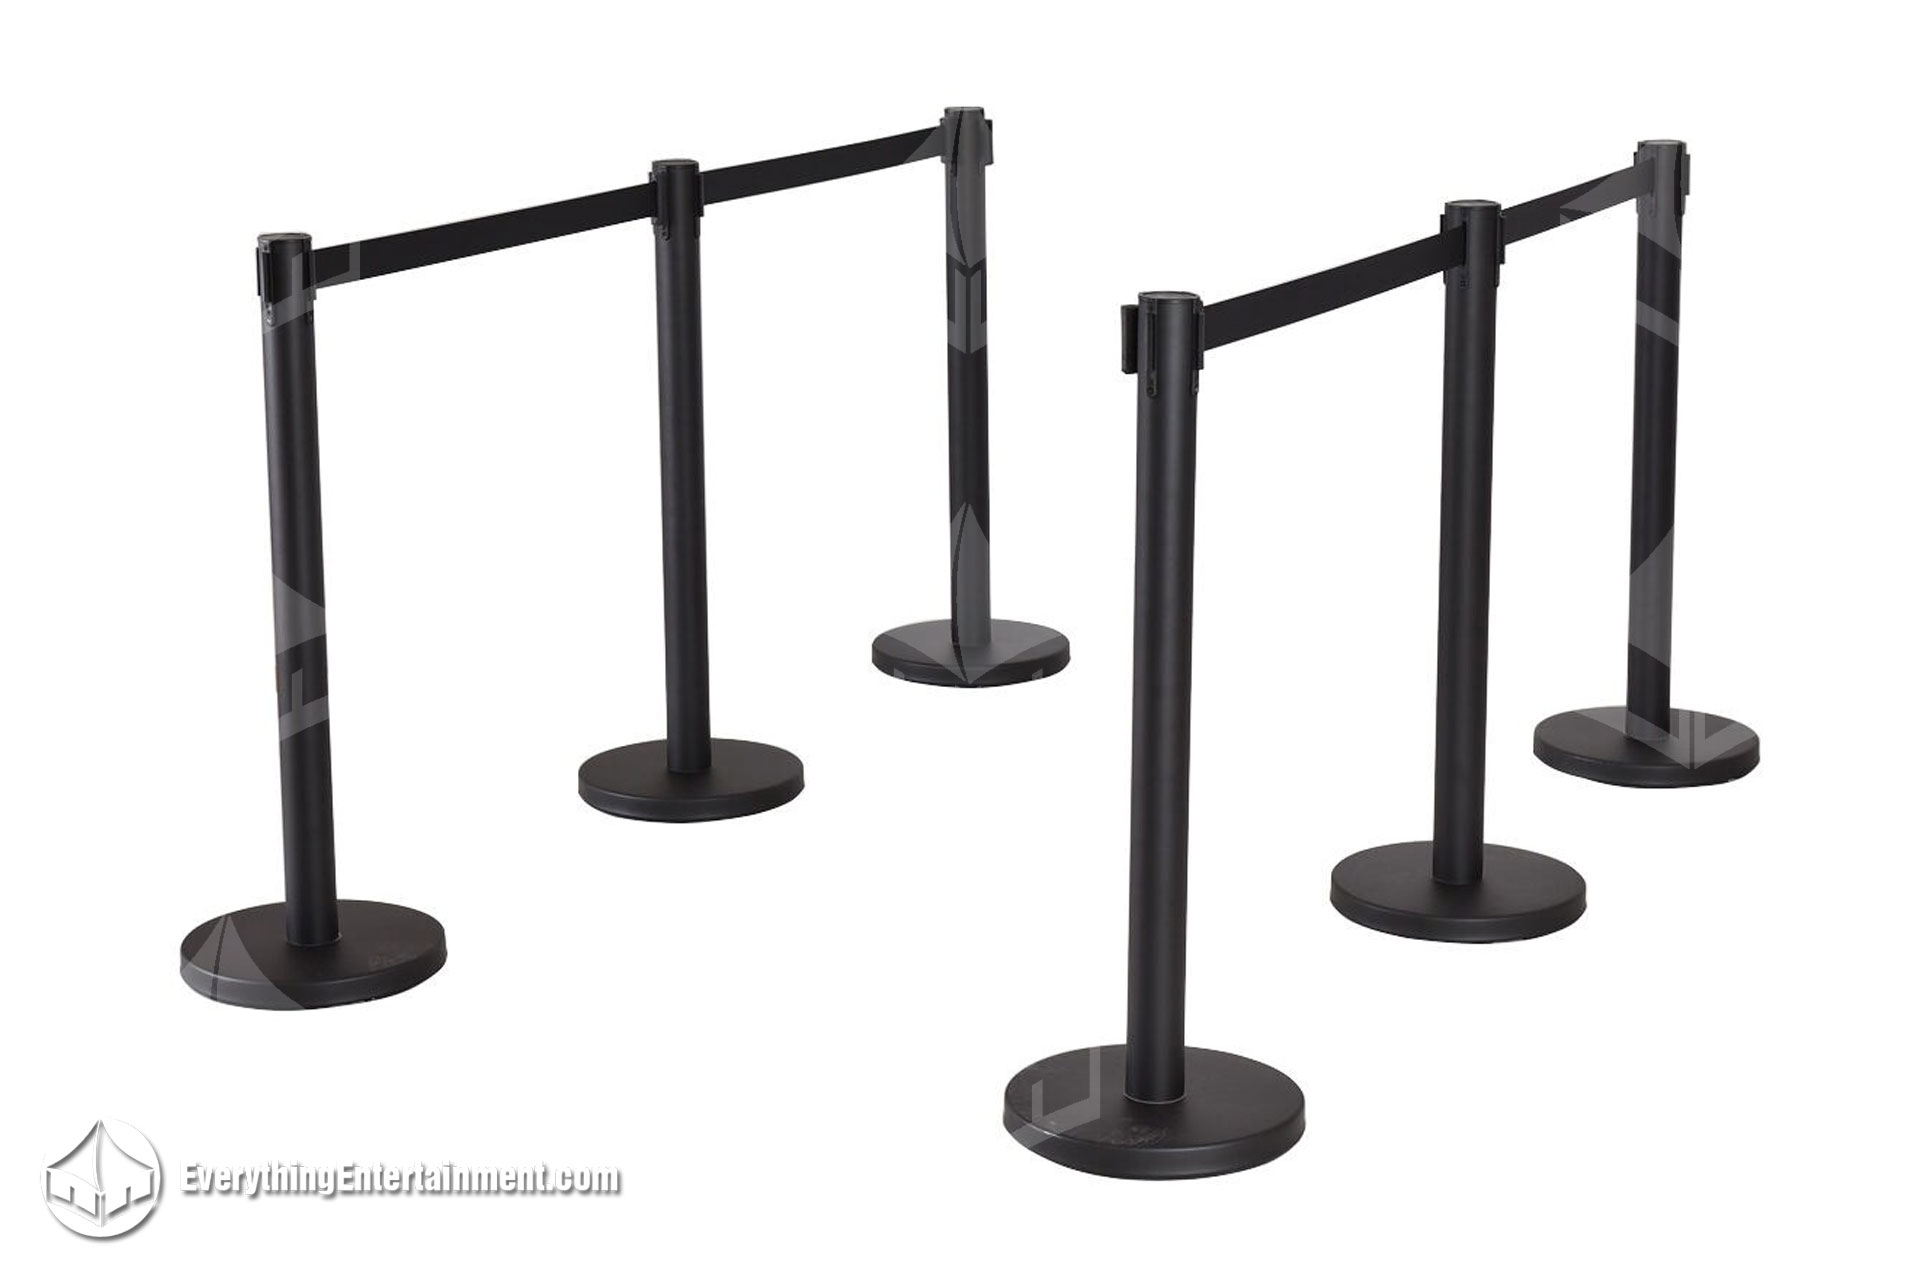 Six black retractable belt stanchions on white background